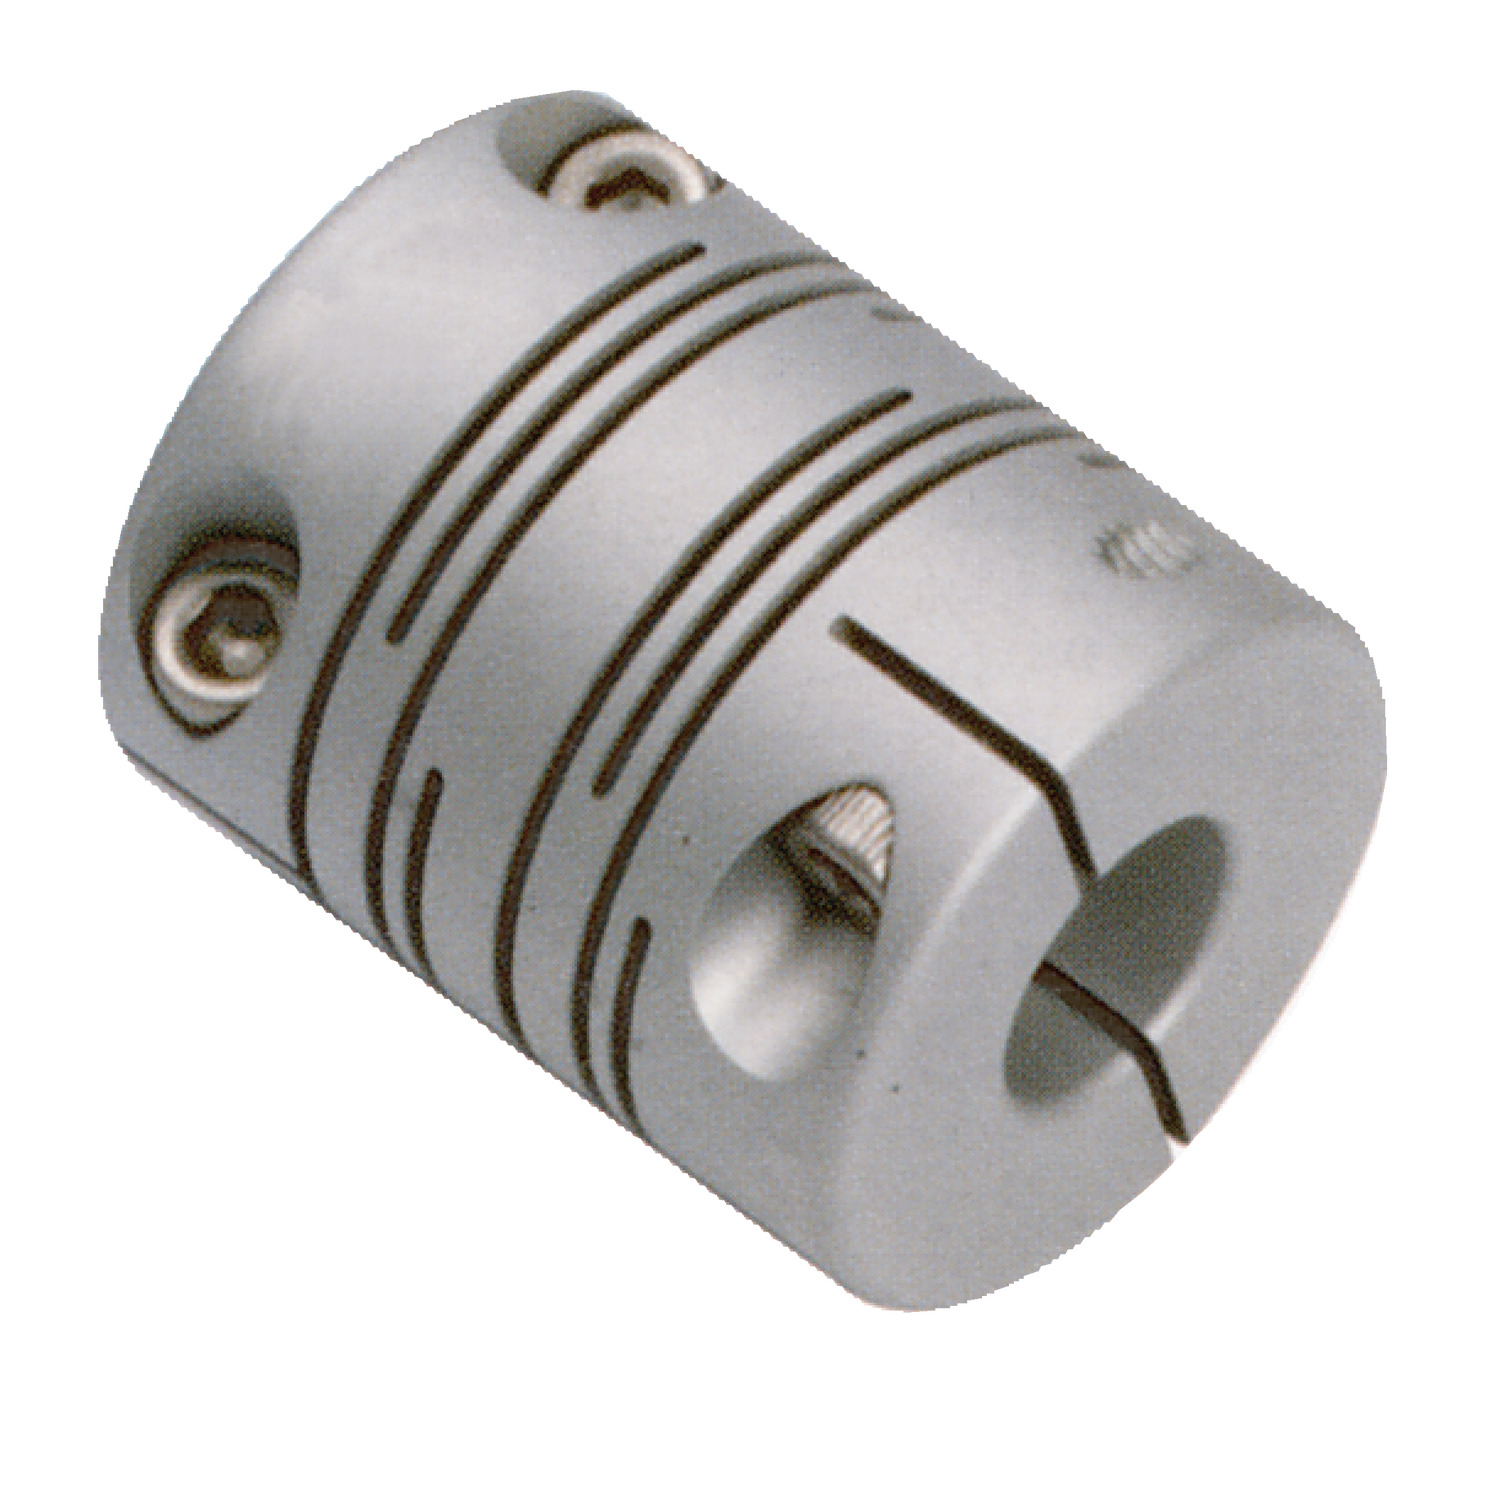 Product R3005, Beamed Coupling - six beam stainless steel, clamp type / 